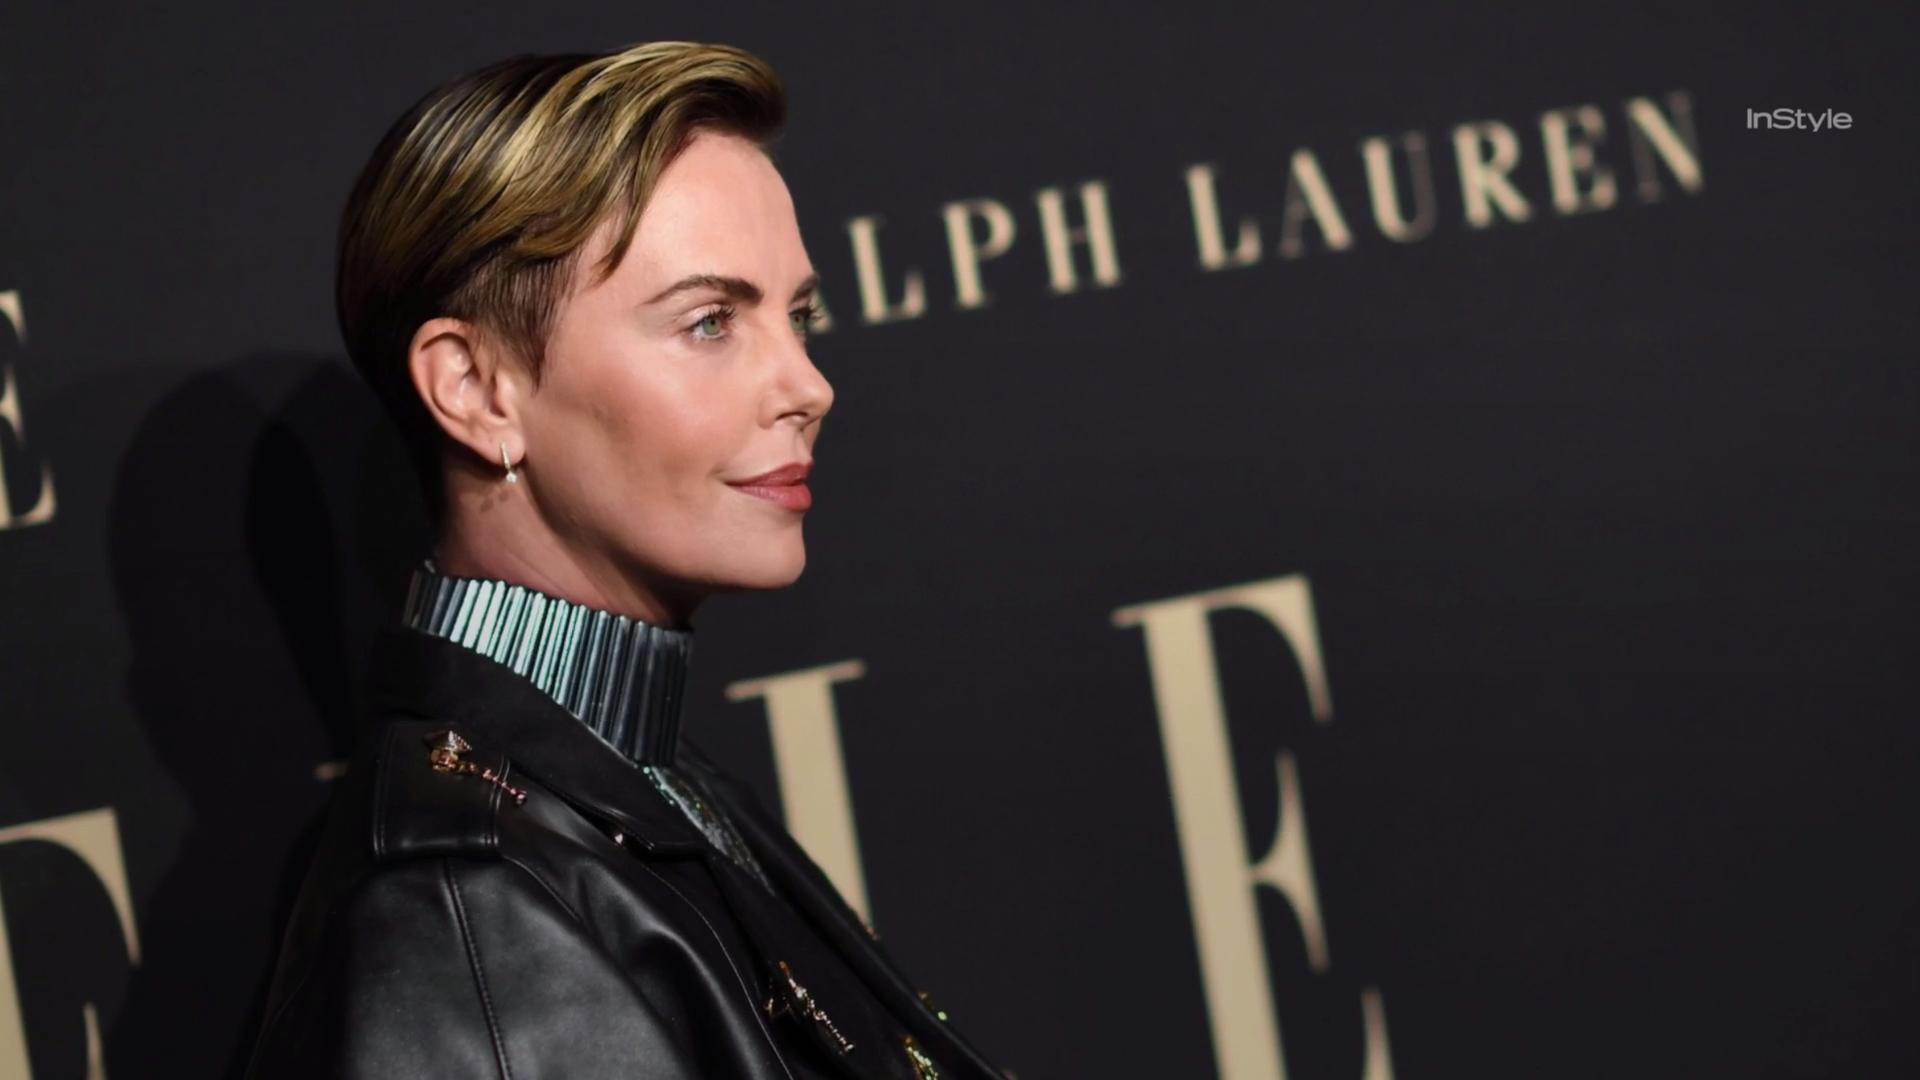 Charlize Theron's Slicked-Back Short Hair - Charlize Theron's Bowl Cut